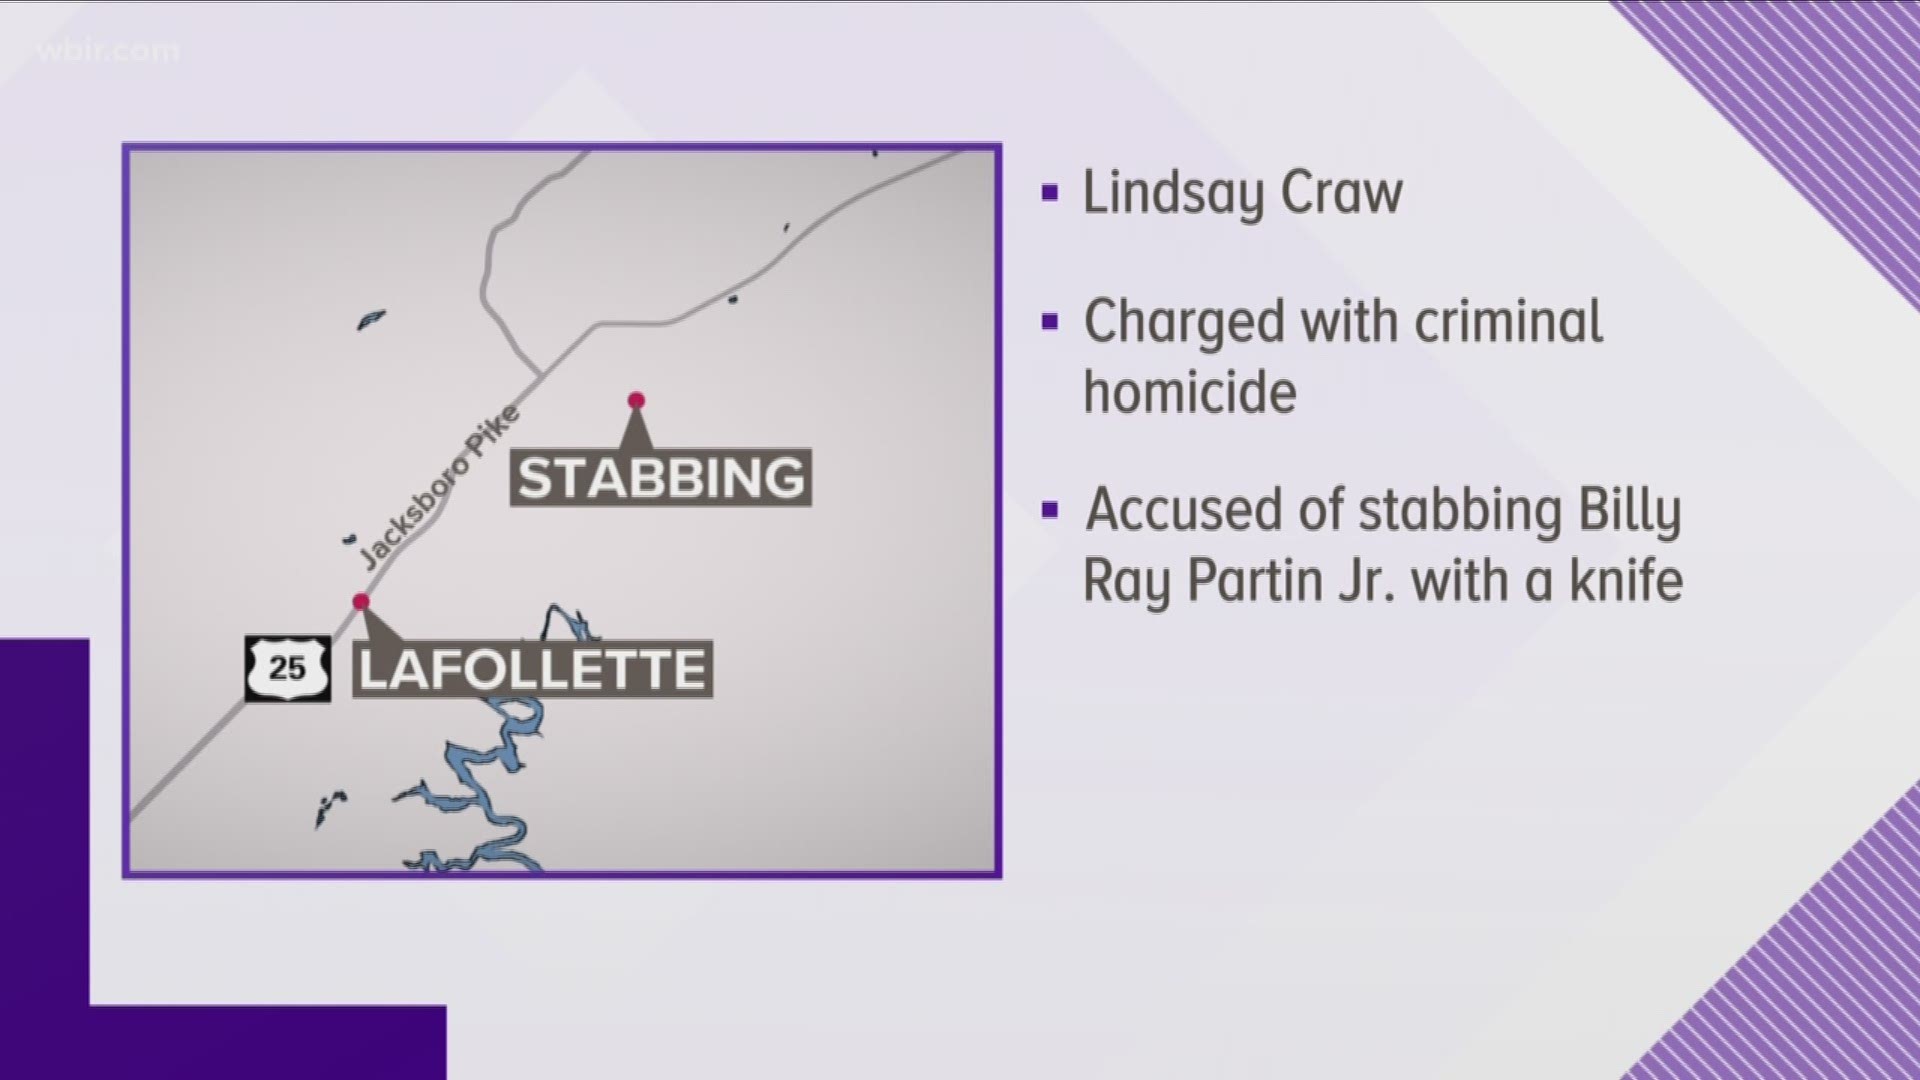 Police say 30-year-old Lindsay Craw stabbed Billy Ray Partin to death with a knife.